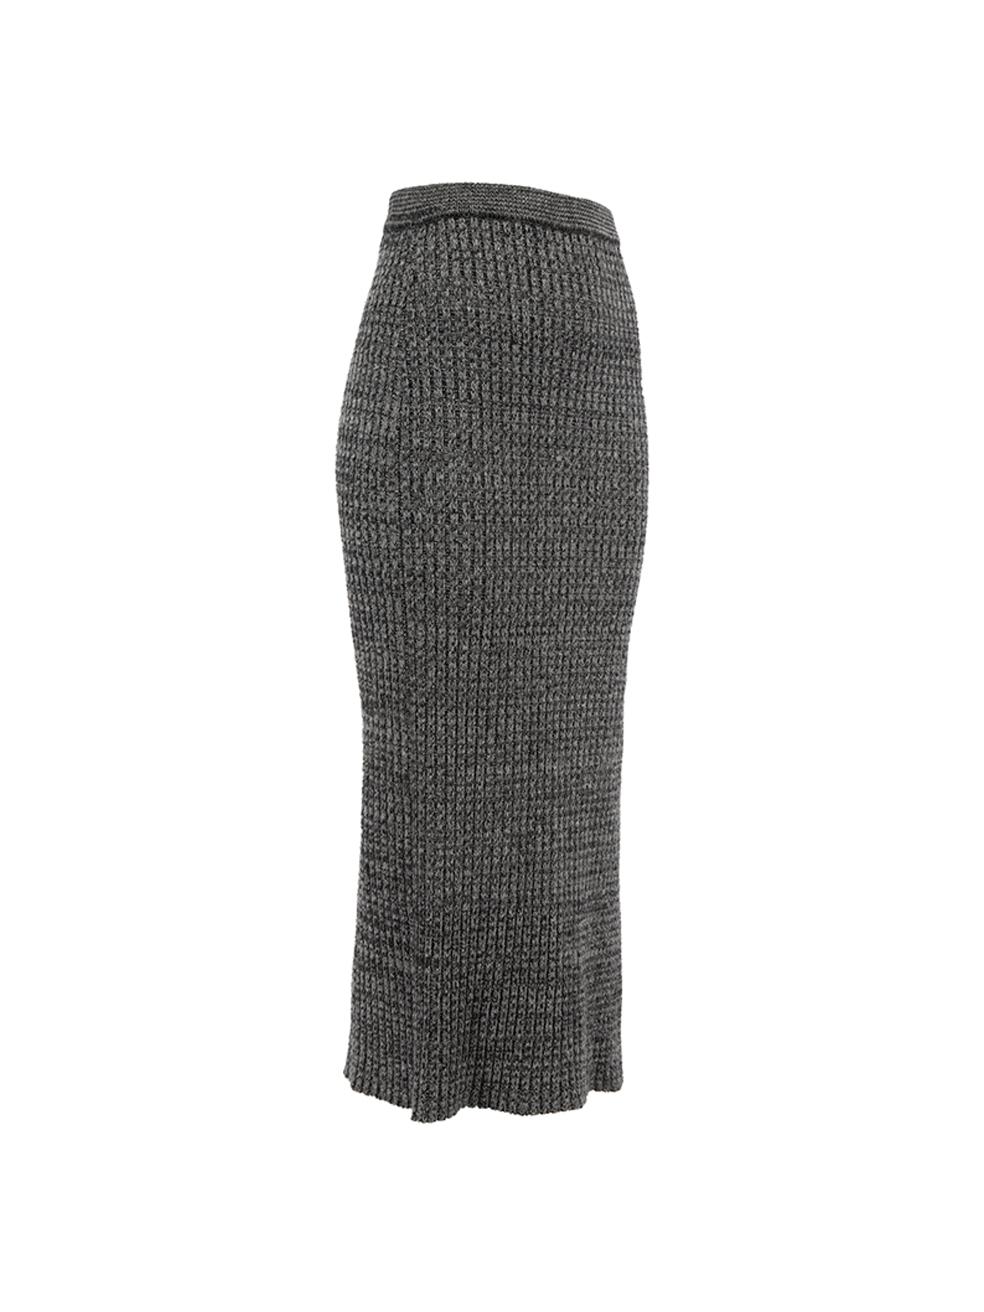 CONDITION is Very good. Minimal wear to skirt is evident. Minimal wear and pilling to the outer fabric on this used Pinko designer resale item.   Details  Grey Synthetic Knit skirt Midi length Side slit   Made in Italy  Composition 50% Polyamide,